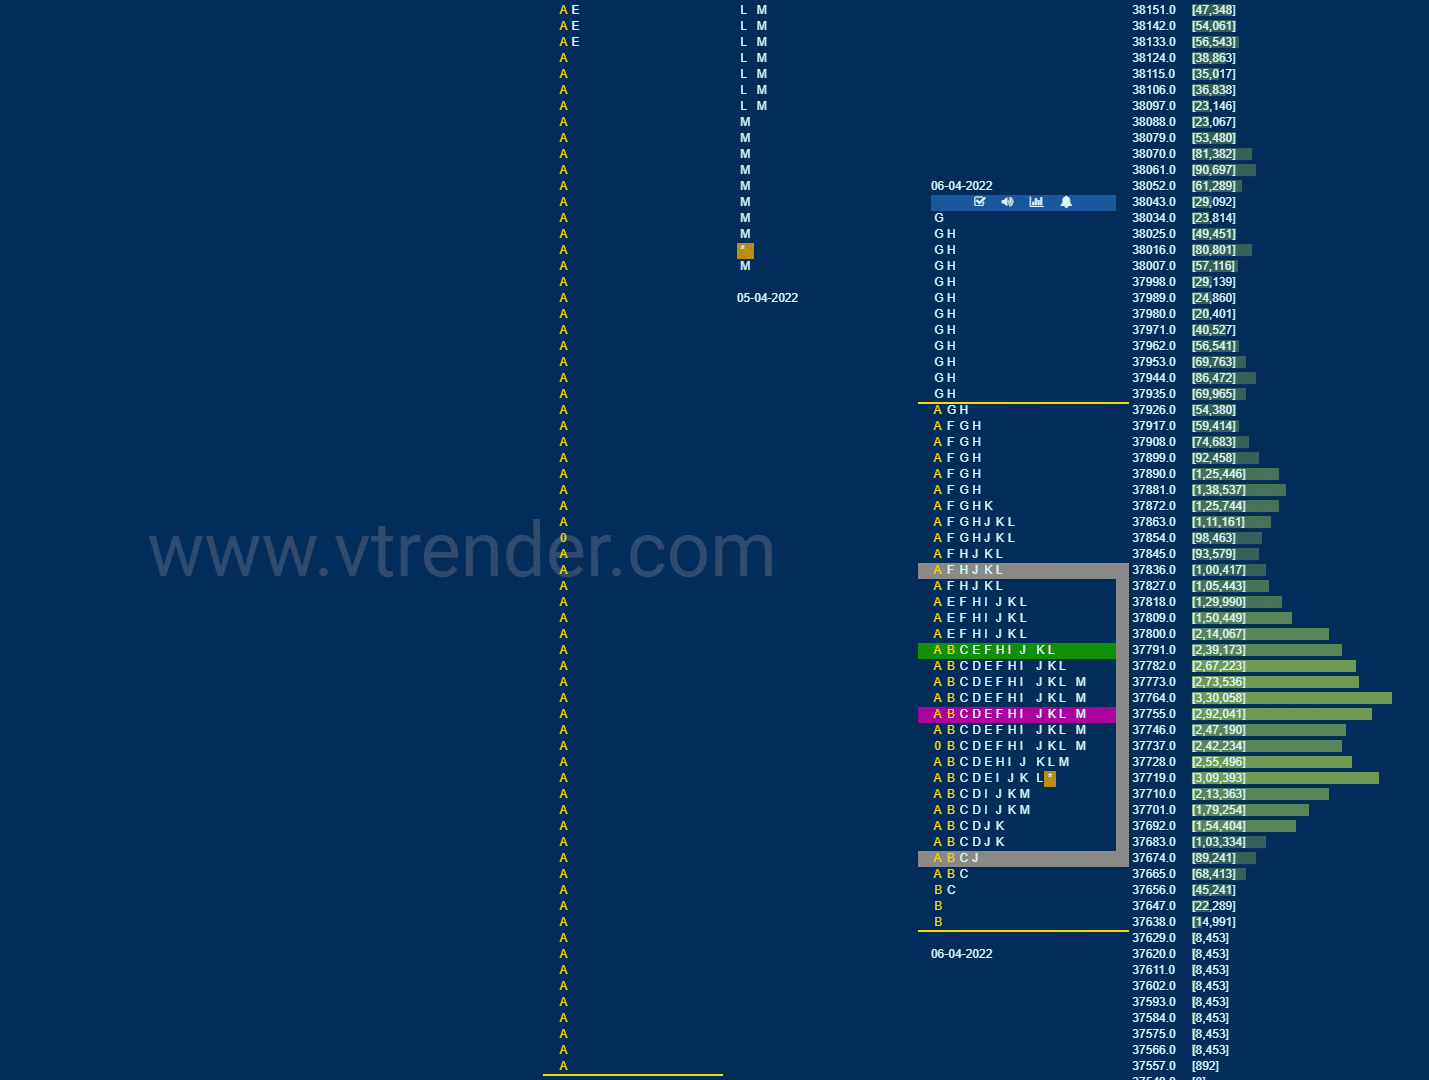 Bnf 3 Market Profile Analysis Dated 06Th April 2022 Banknifty Futures, Charts, Day Trading, Intraday Trading, Intraday Trading Strategies, Market Profile, Market Profile Trading Strategies, Nifty Futures, Order Flow Analysis, Support And Resistance, Technical Analysis, Trading Strategies, Volume Profile Trading